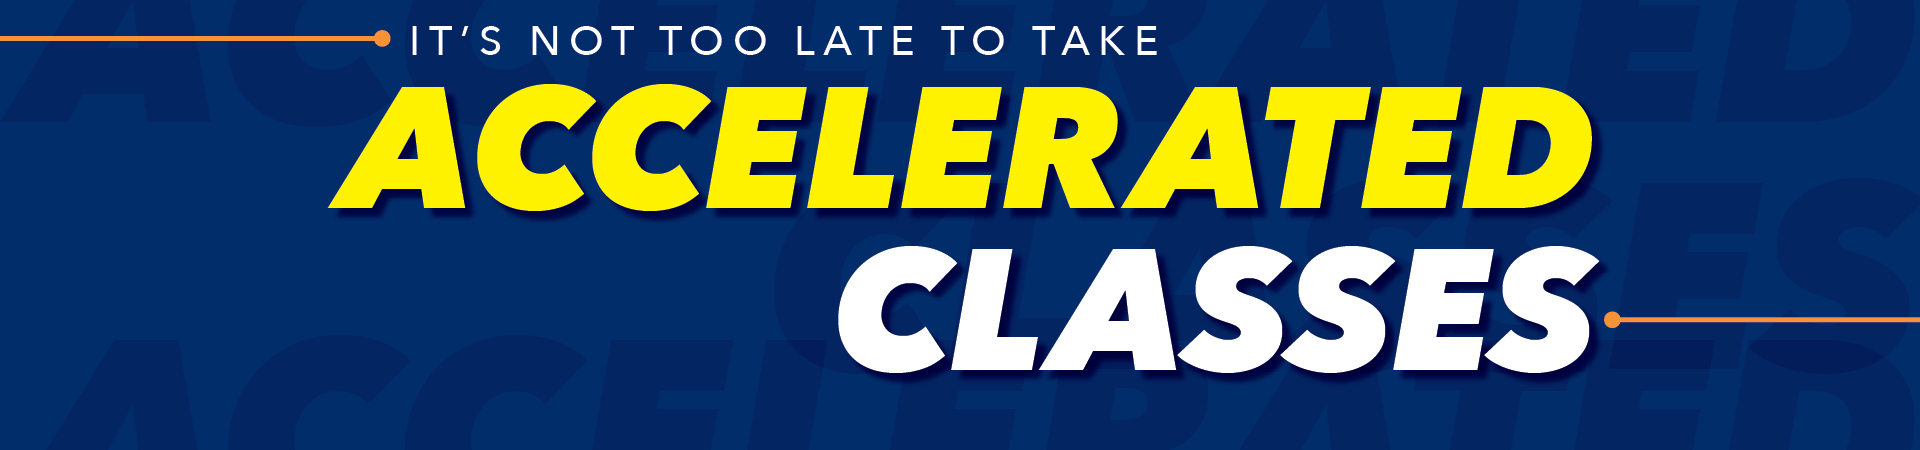 It's not too late to take accelerated classes